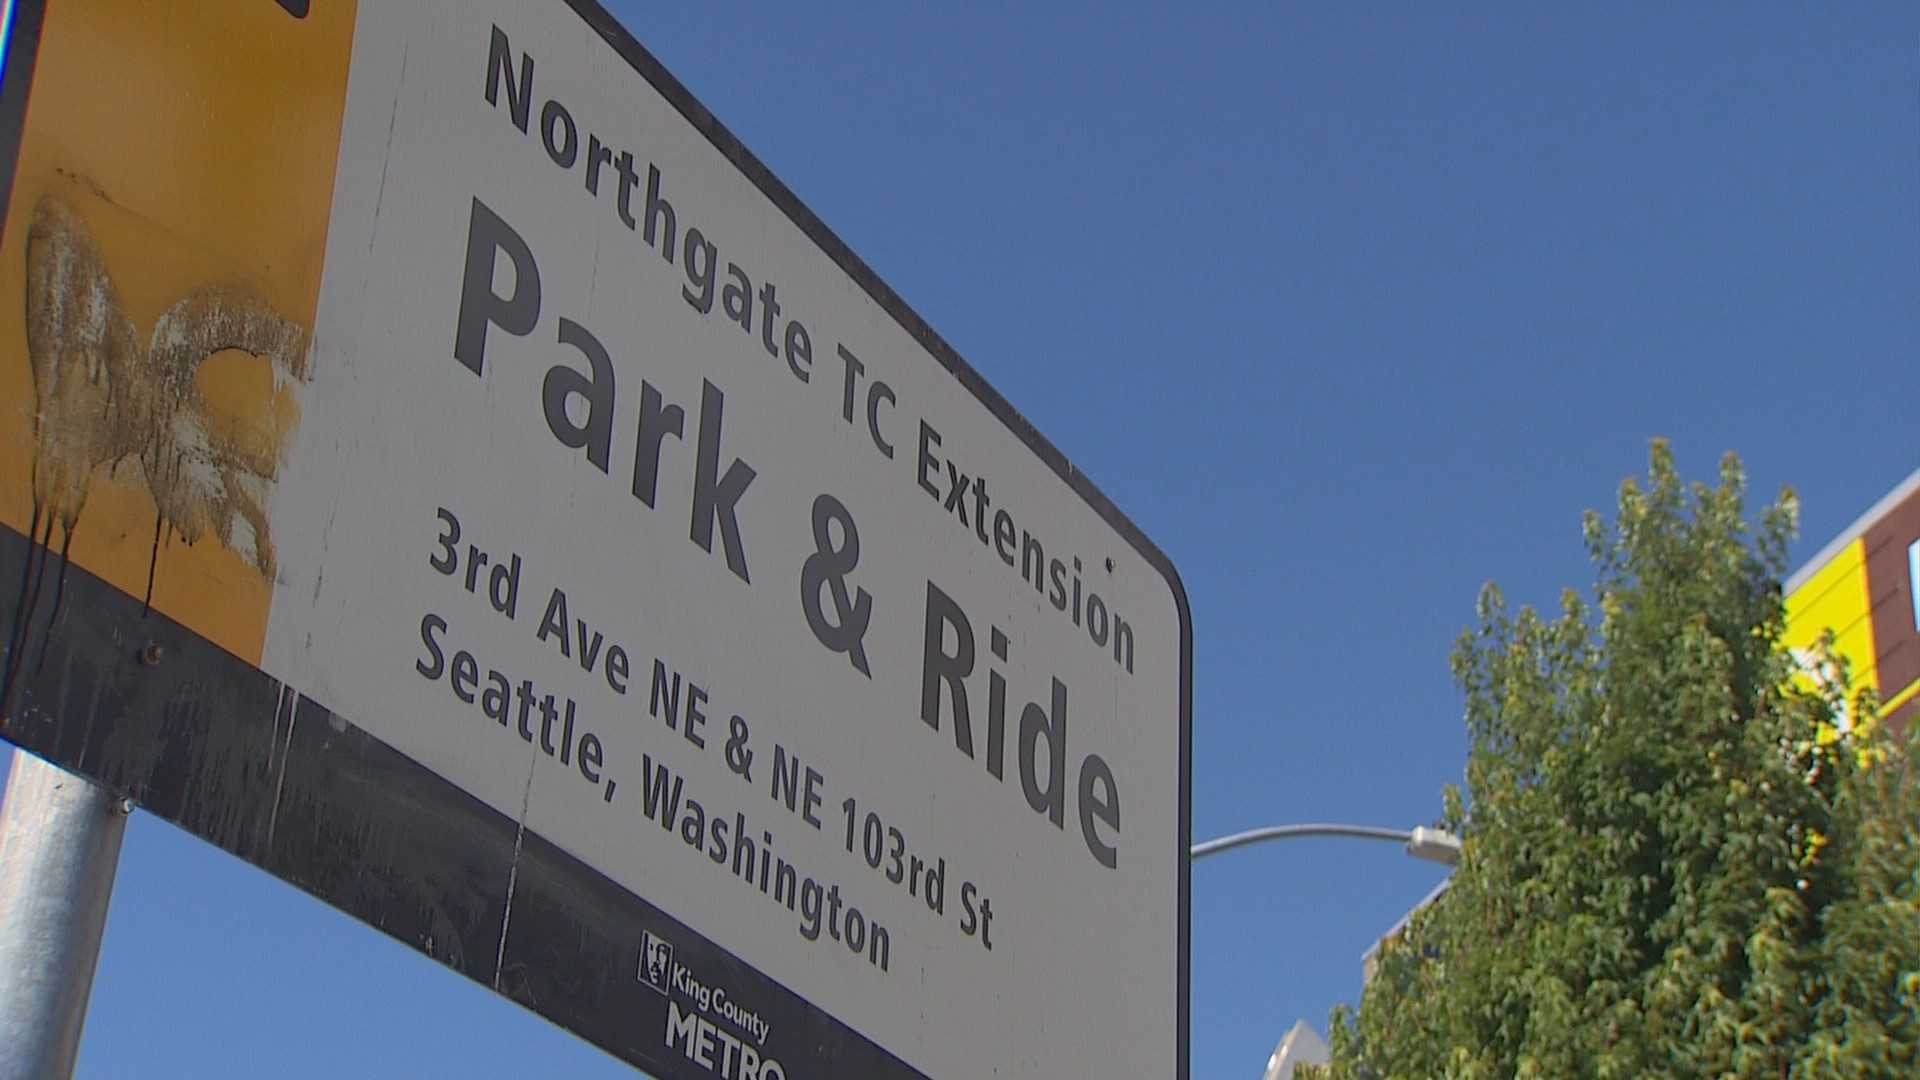 The King County Council approved a plan to bring paid parking permits to 10 of Metro's popular Park & Ride lots. The permit would reserve a space for single-occupancy vehicles from 4 a.m. to 10 a.m., Monday through Friday.